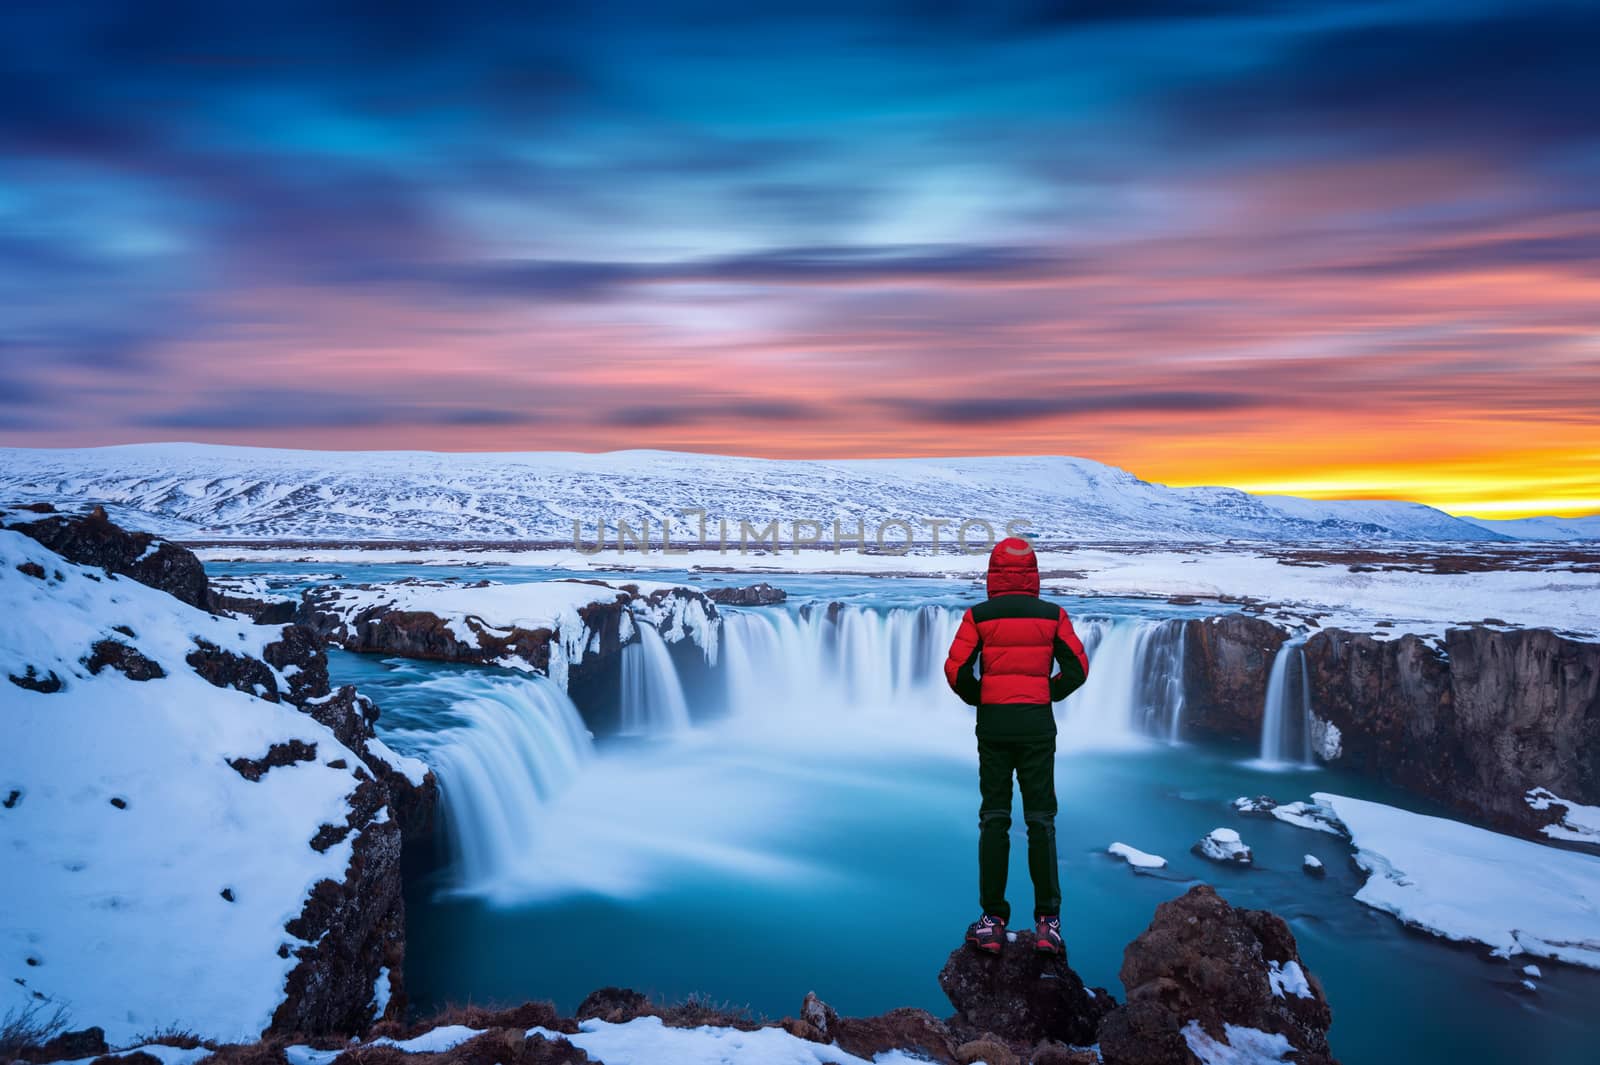 Godafoss waterfall at sunset in winter, Iceland. Guy in red jacket looks at Godafoss waterfall. by gutarphotoghaphy